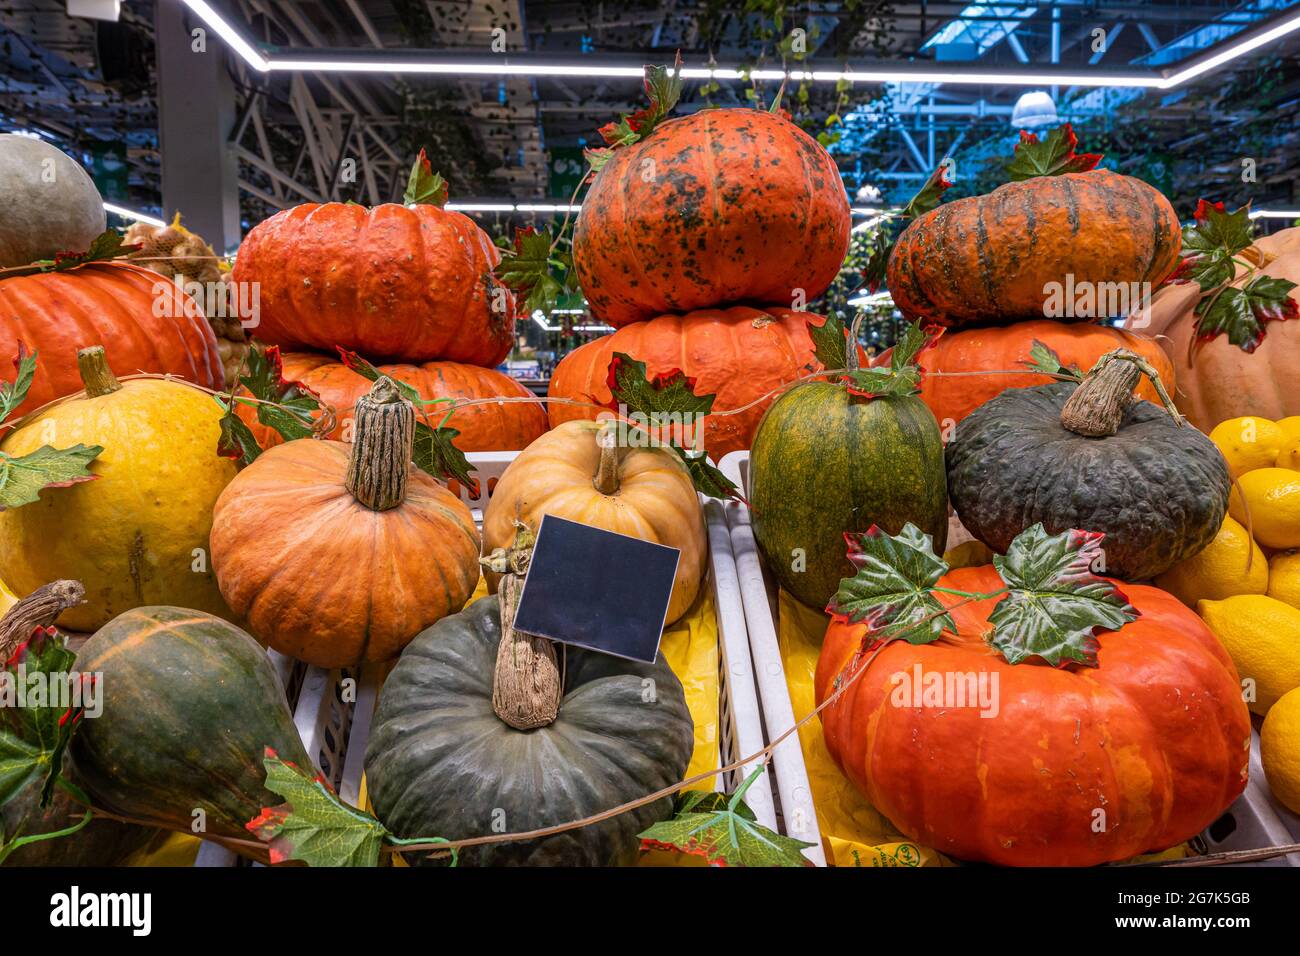 A pile of pumpkins, a stall with a ripe pumpkin close-up at a farmer's market. Copy space. Mockup. Stock Photo